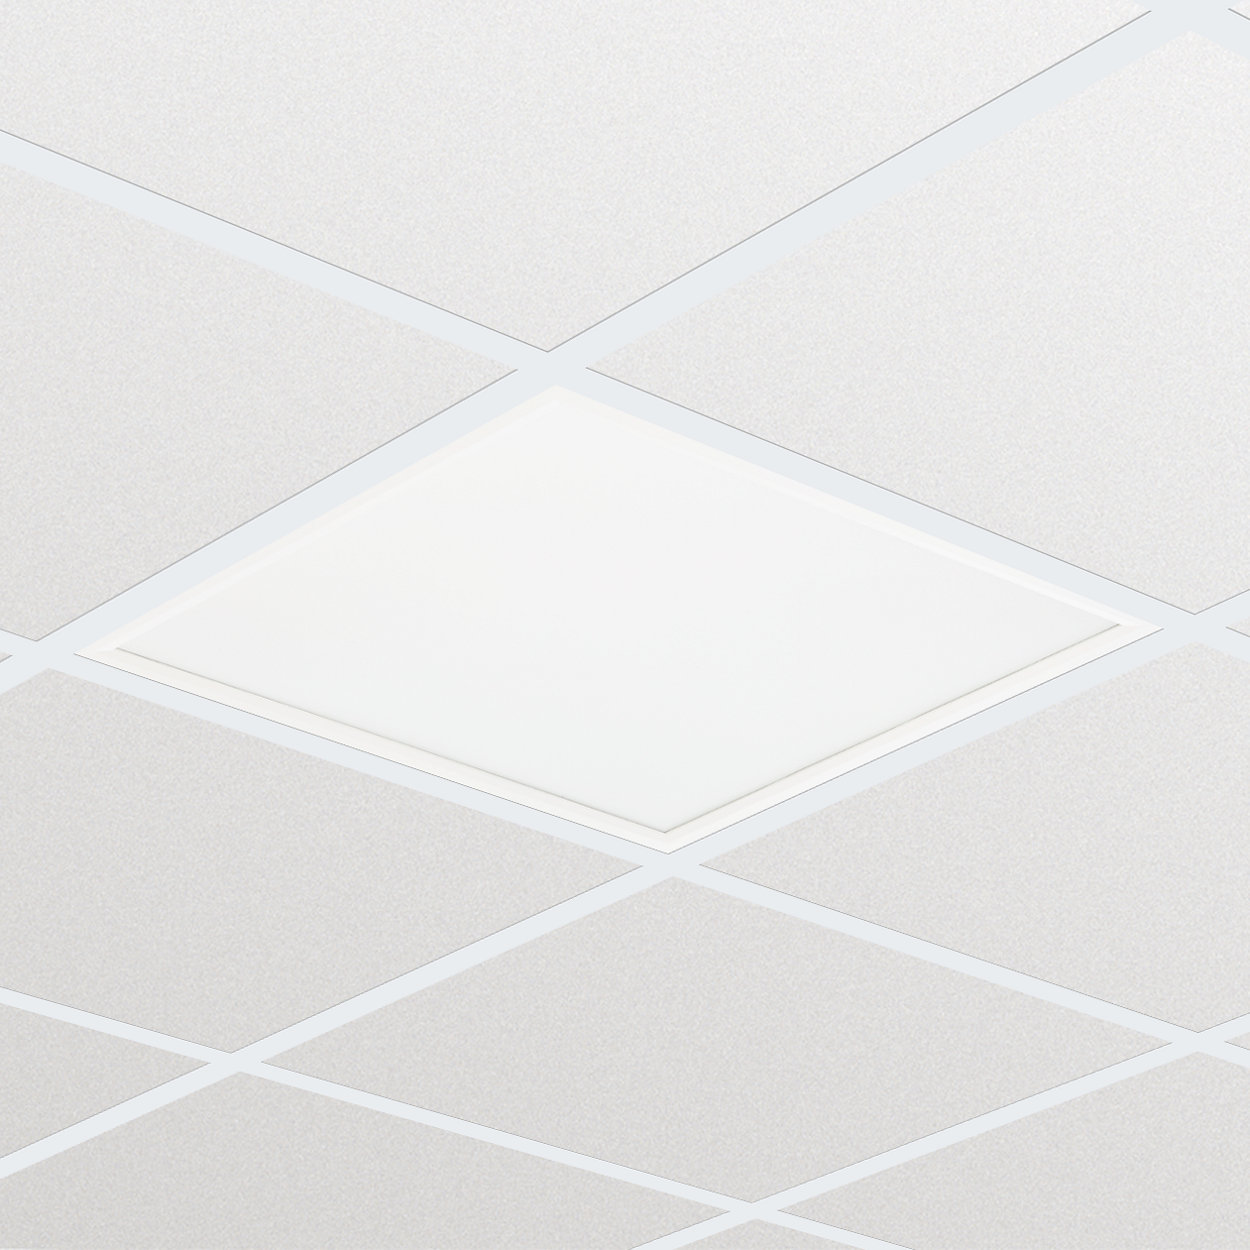 CoreLine Panel – the clear choice for LED